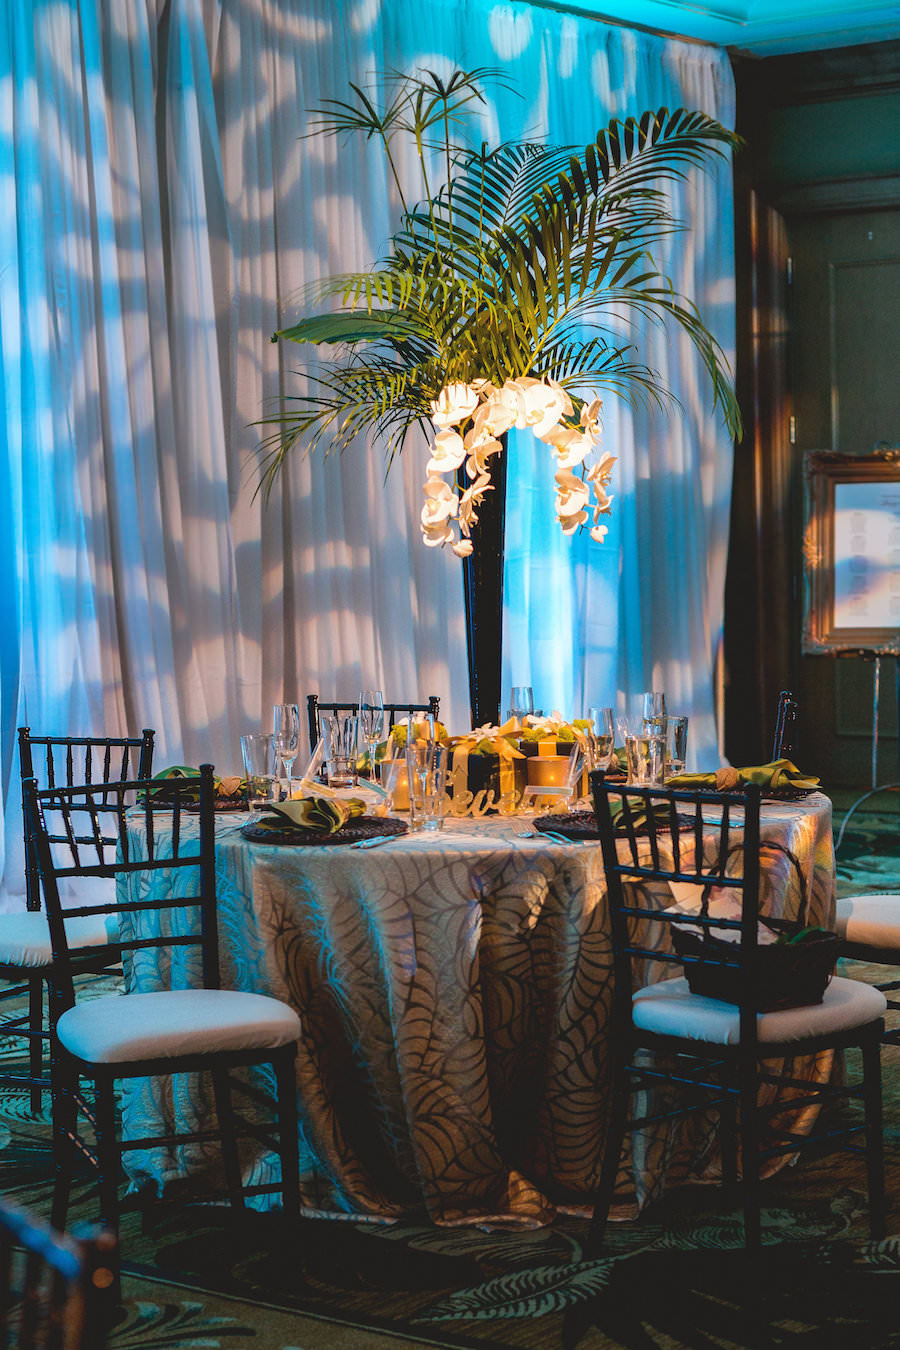 Ballroom Tampa Bay Indoor Wedding Reception with Tall Palm Centerpiece Decor and Chiavari Chairs | Waterfront Wedding Venue Hyatt Regency Clearwater Beach | Wedding Planner Special Moments Event Planning | Apple Blossom Floral Designs | Signature Event Rentals